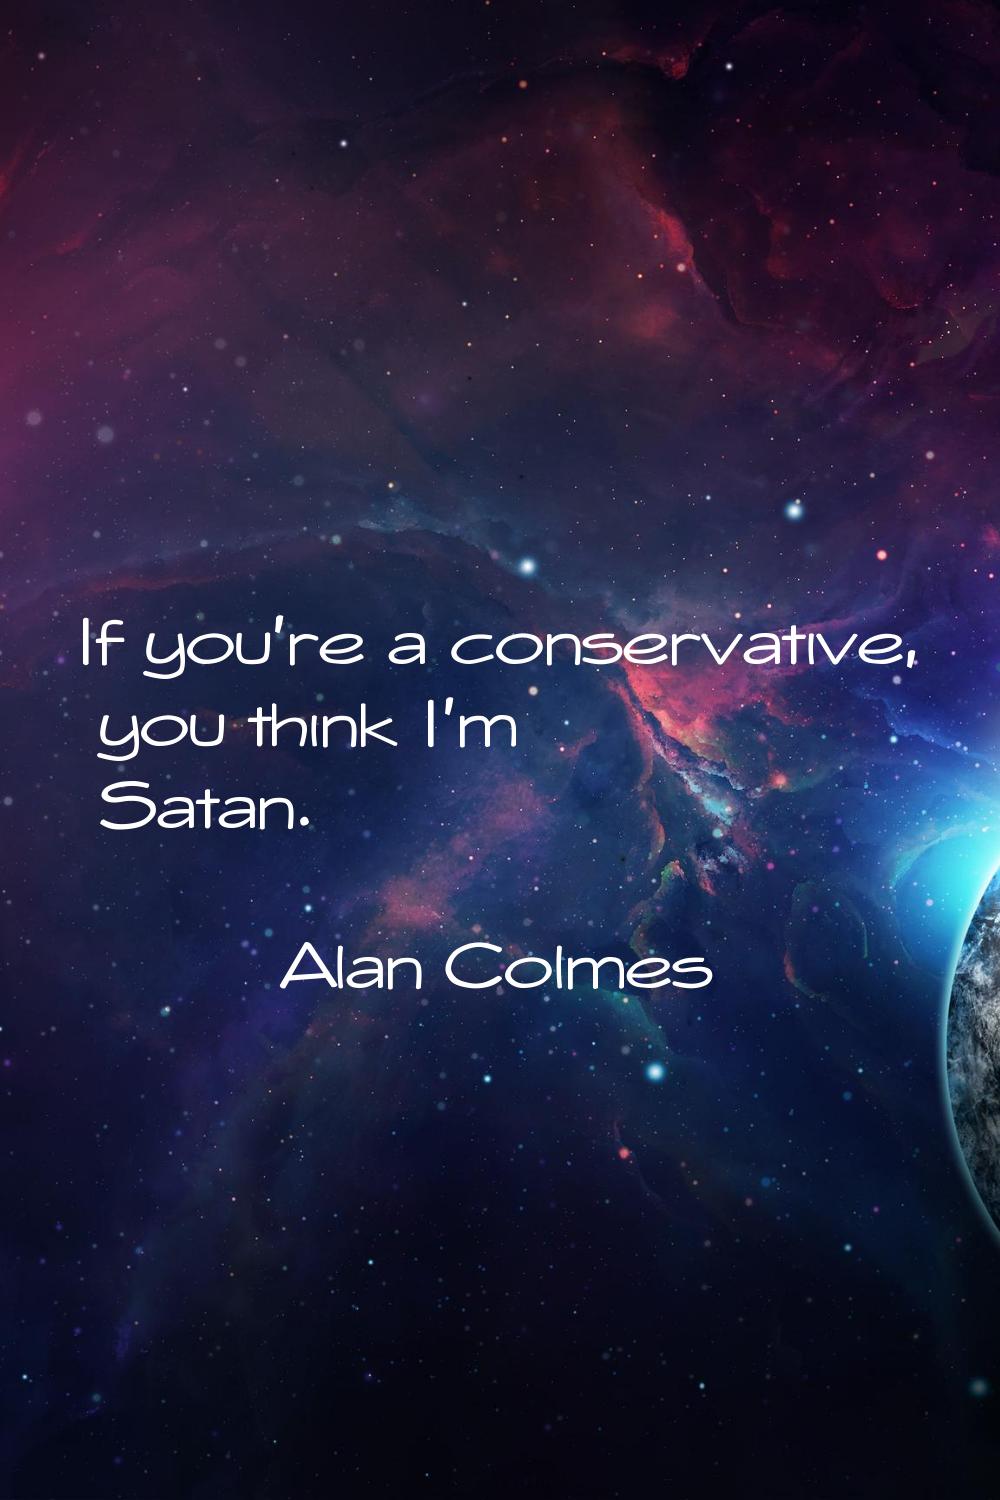 If you're a conservative, you think I'm Satan.